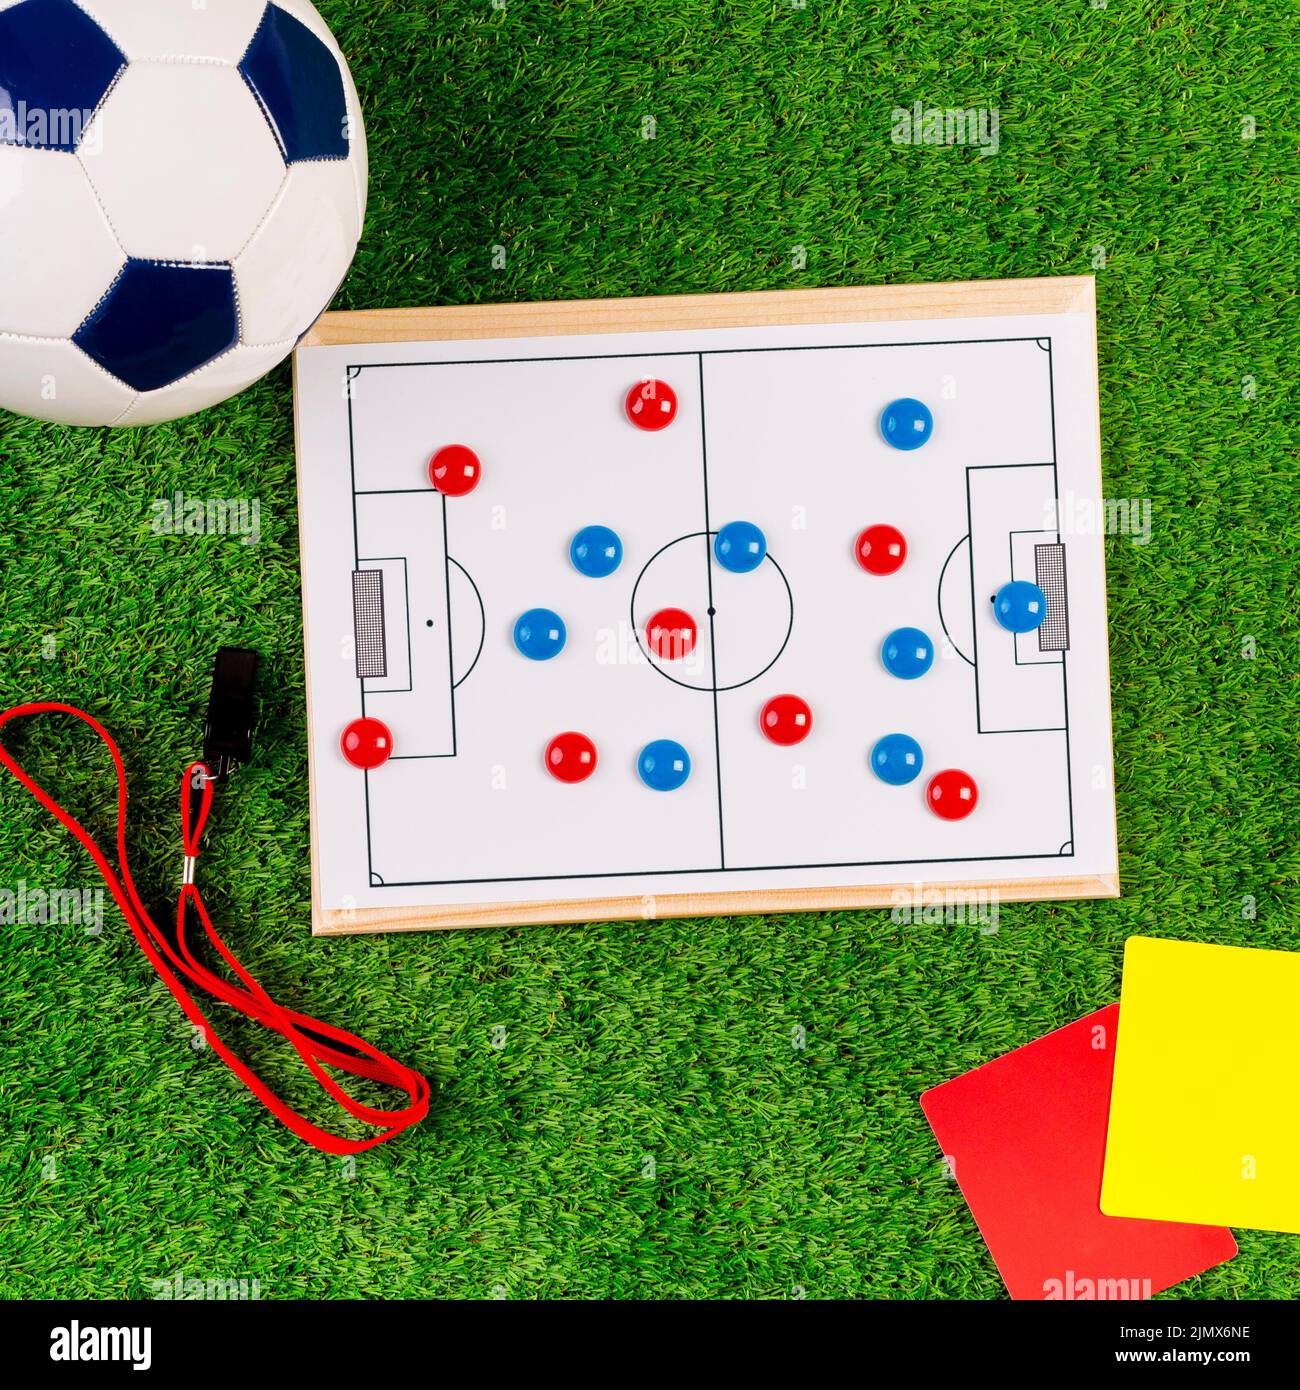 Football composition with white tactic board Stock Photo